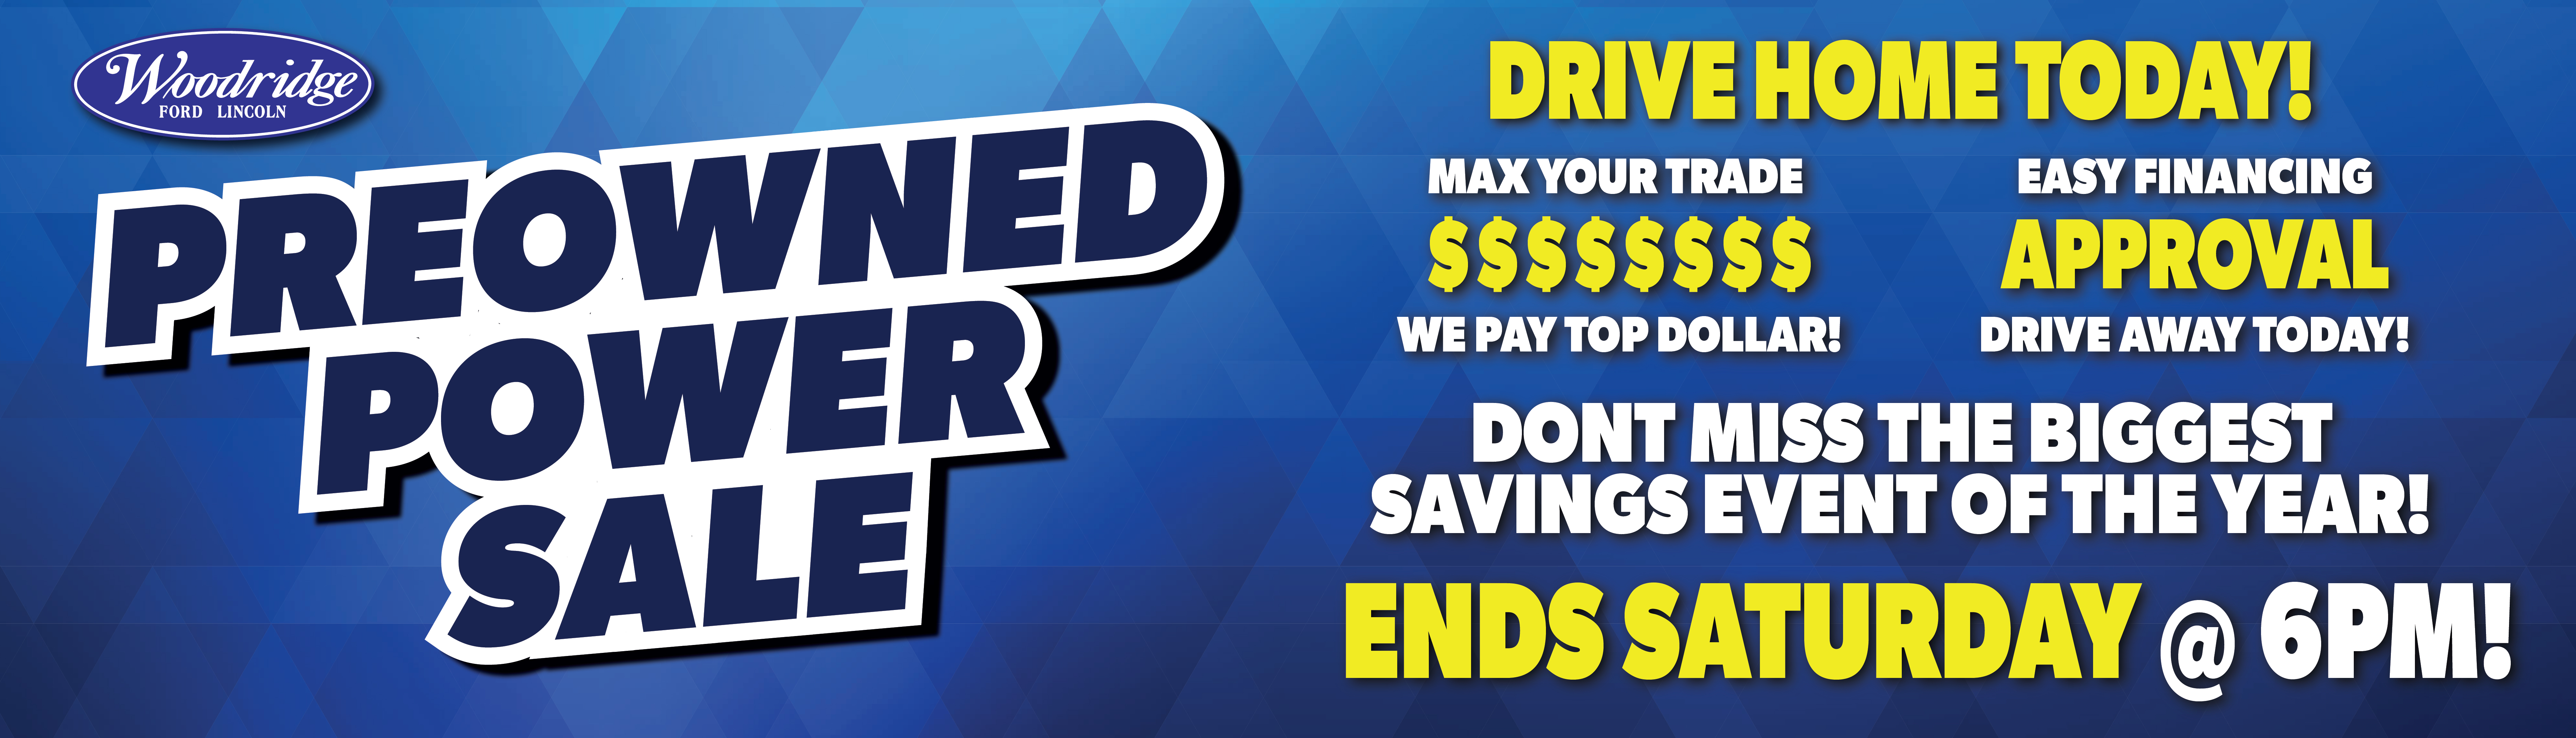 Preowned Power Sale Banner